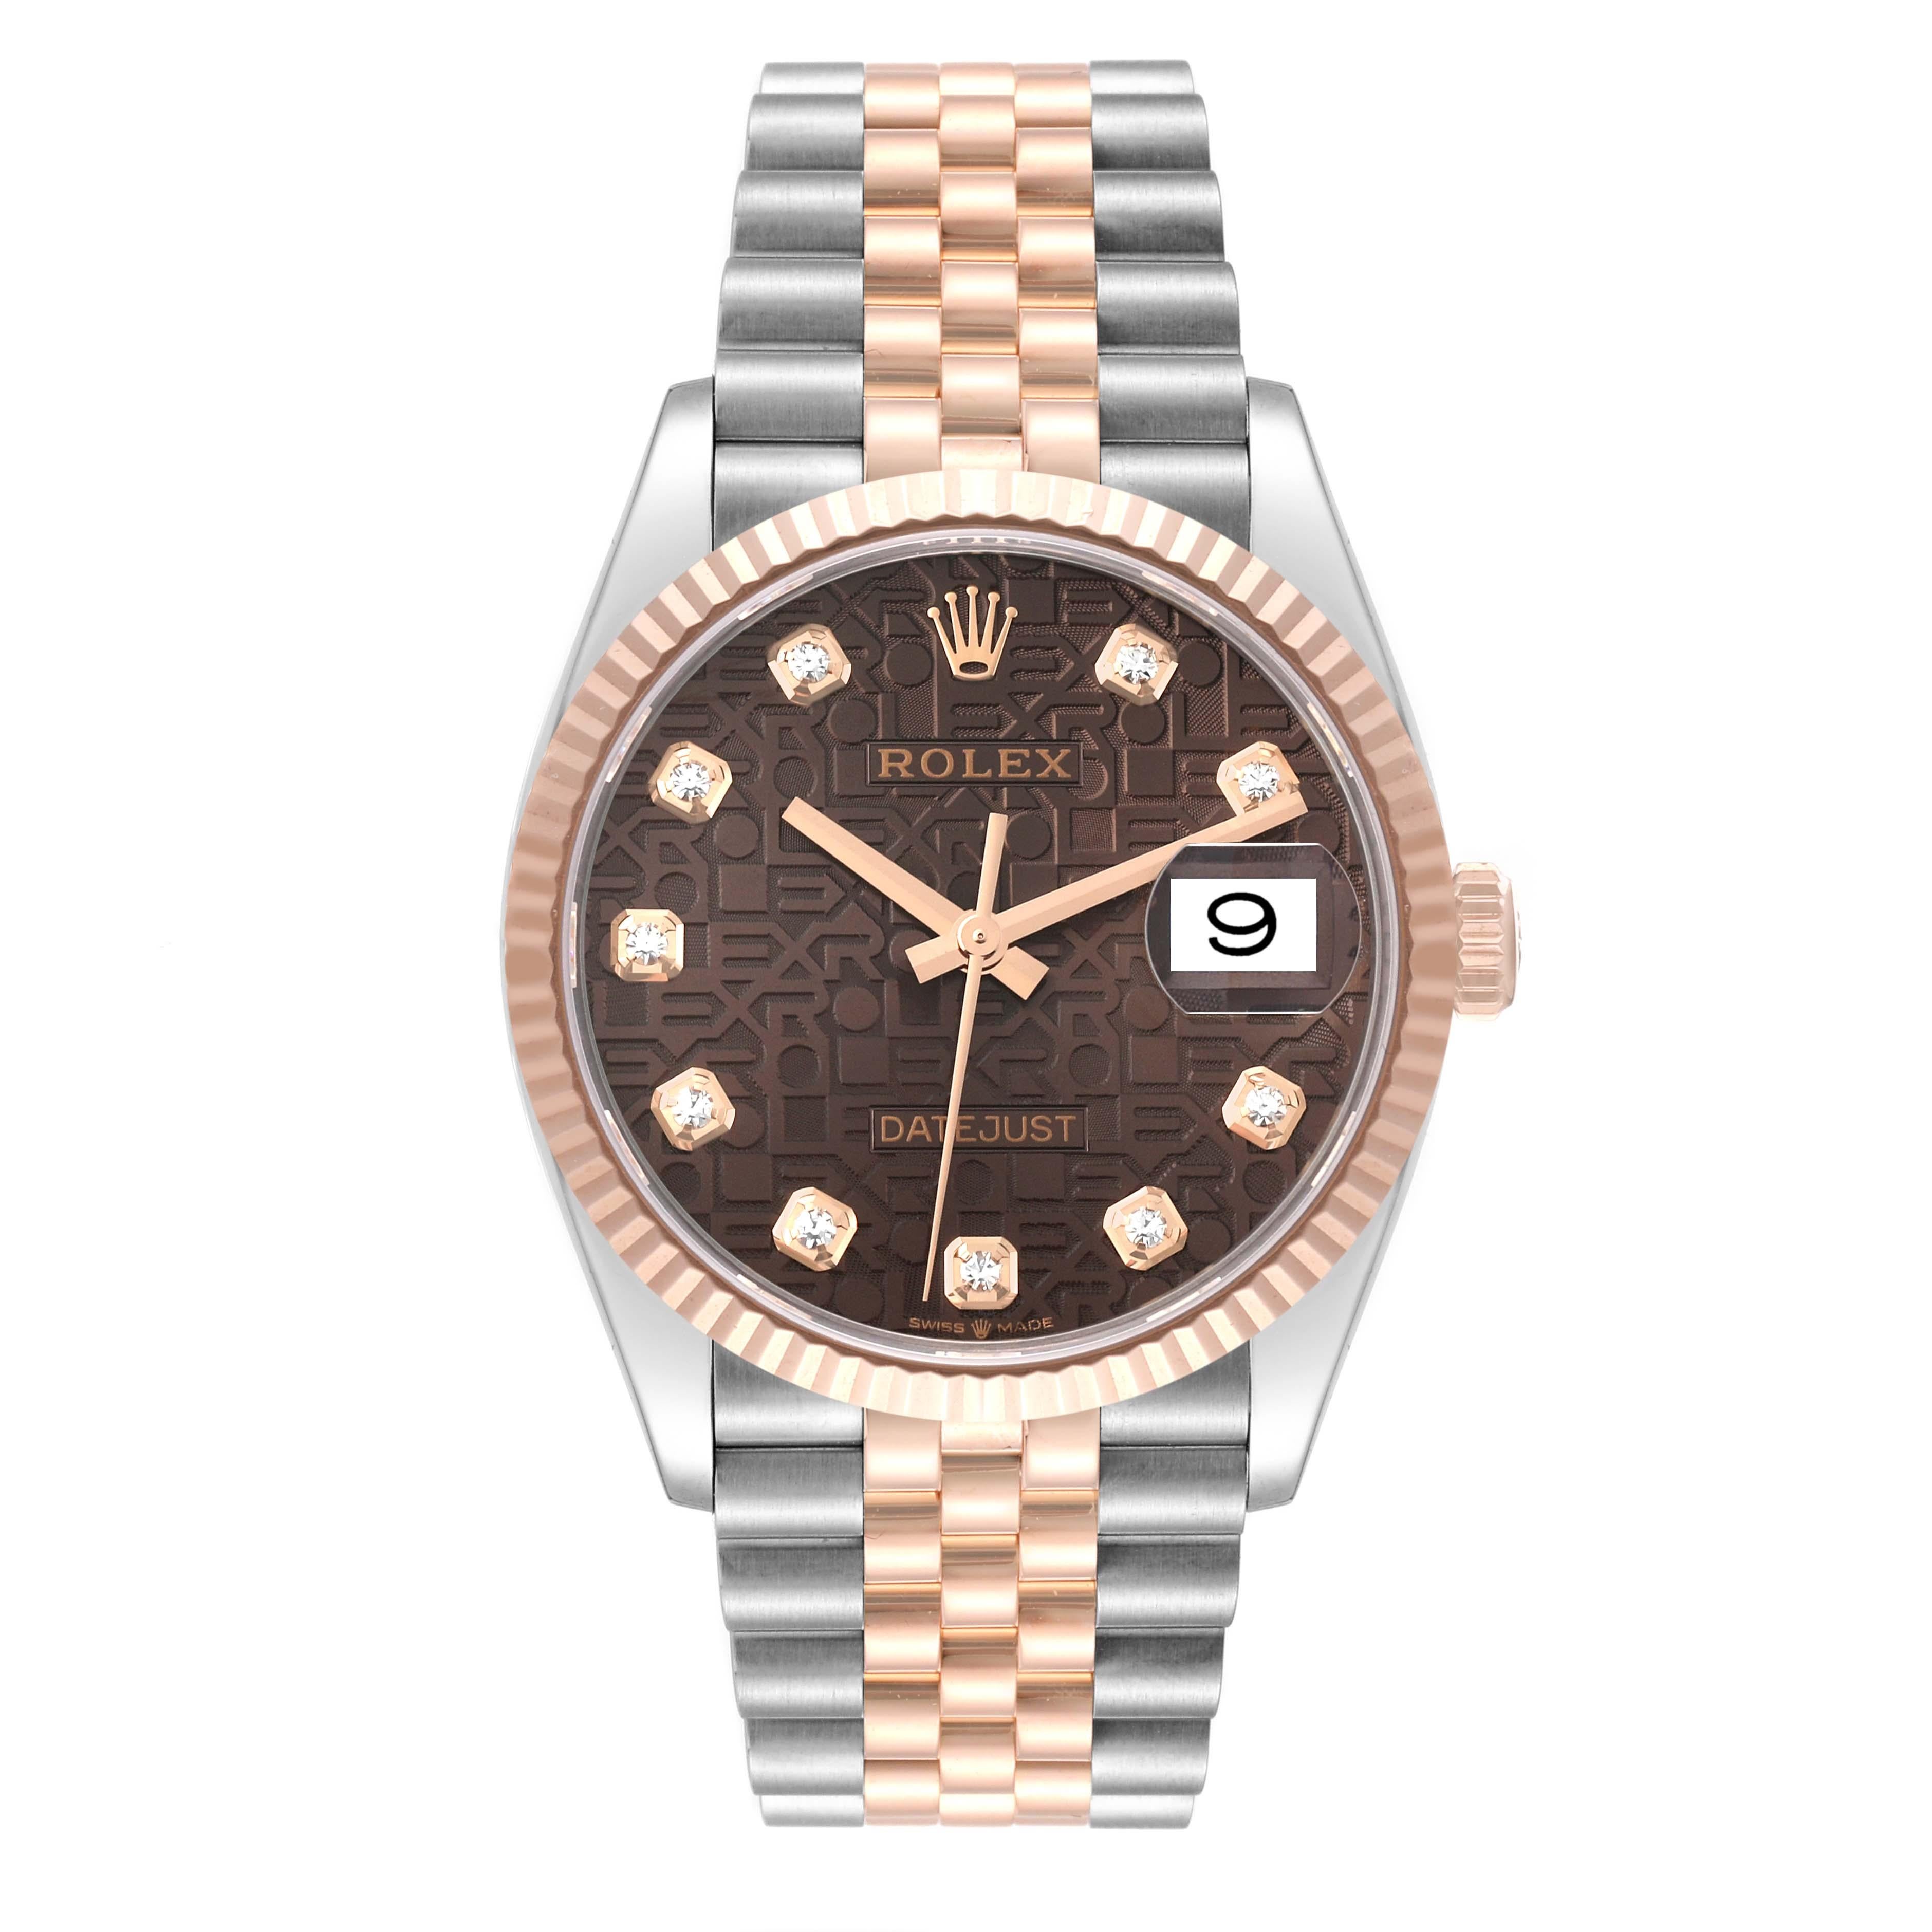 Rolex Datejust Chocolate Anniversary Steel Rose Gold Diamond Mens Watch 126231. Officially certified chronometer automatic self-winding movement. Stainless steel case 36.0 mm in diameter. Rolex logo on an 18k rose gold crown. 18k rose gold fluted